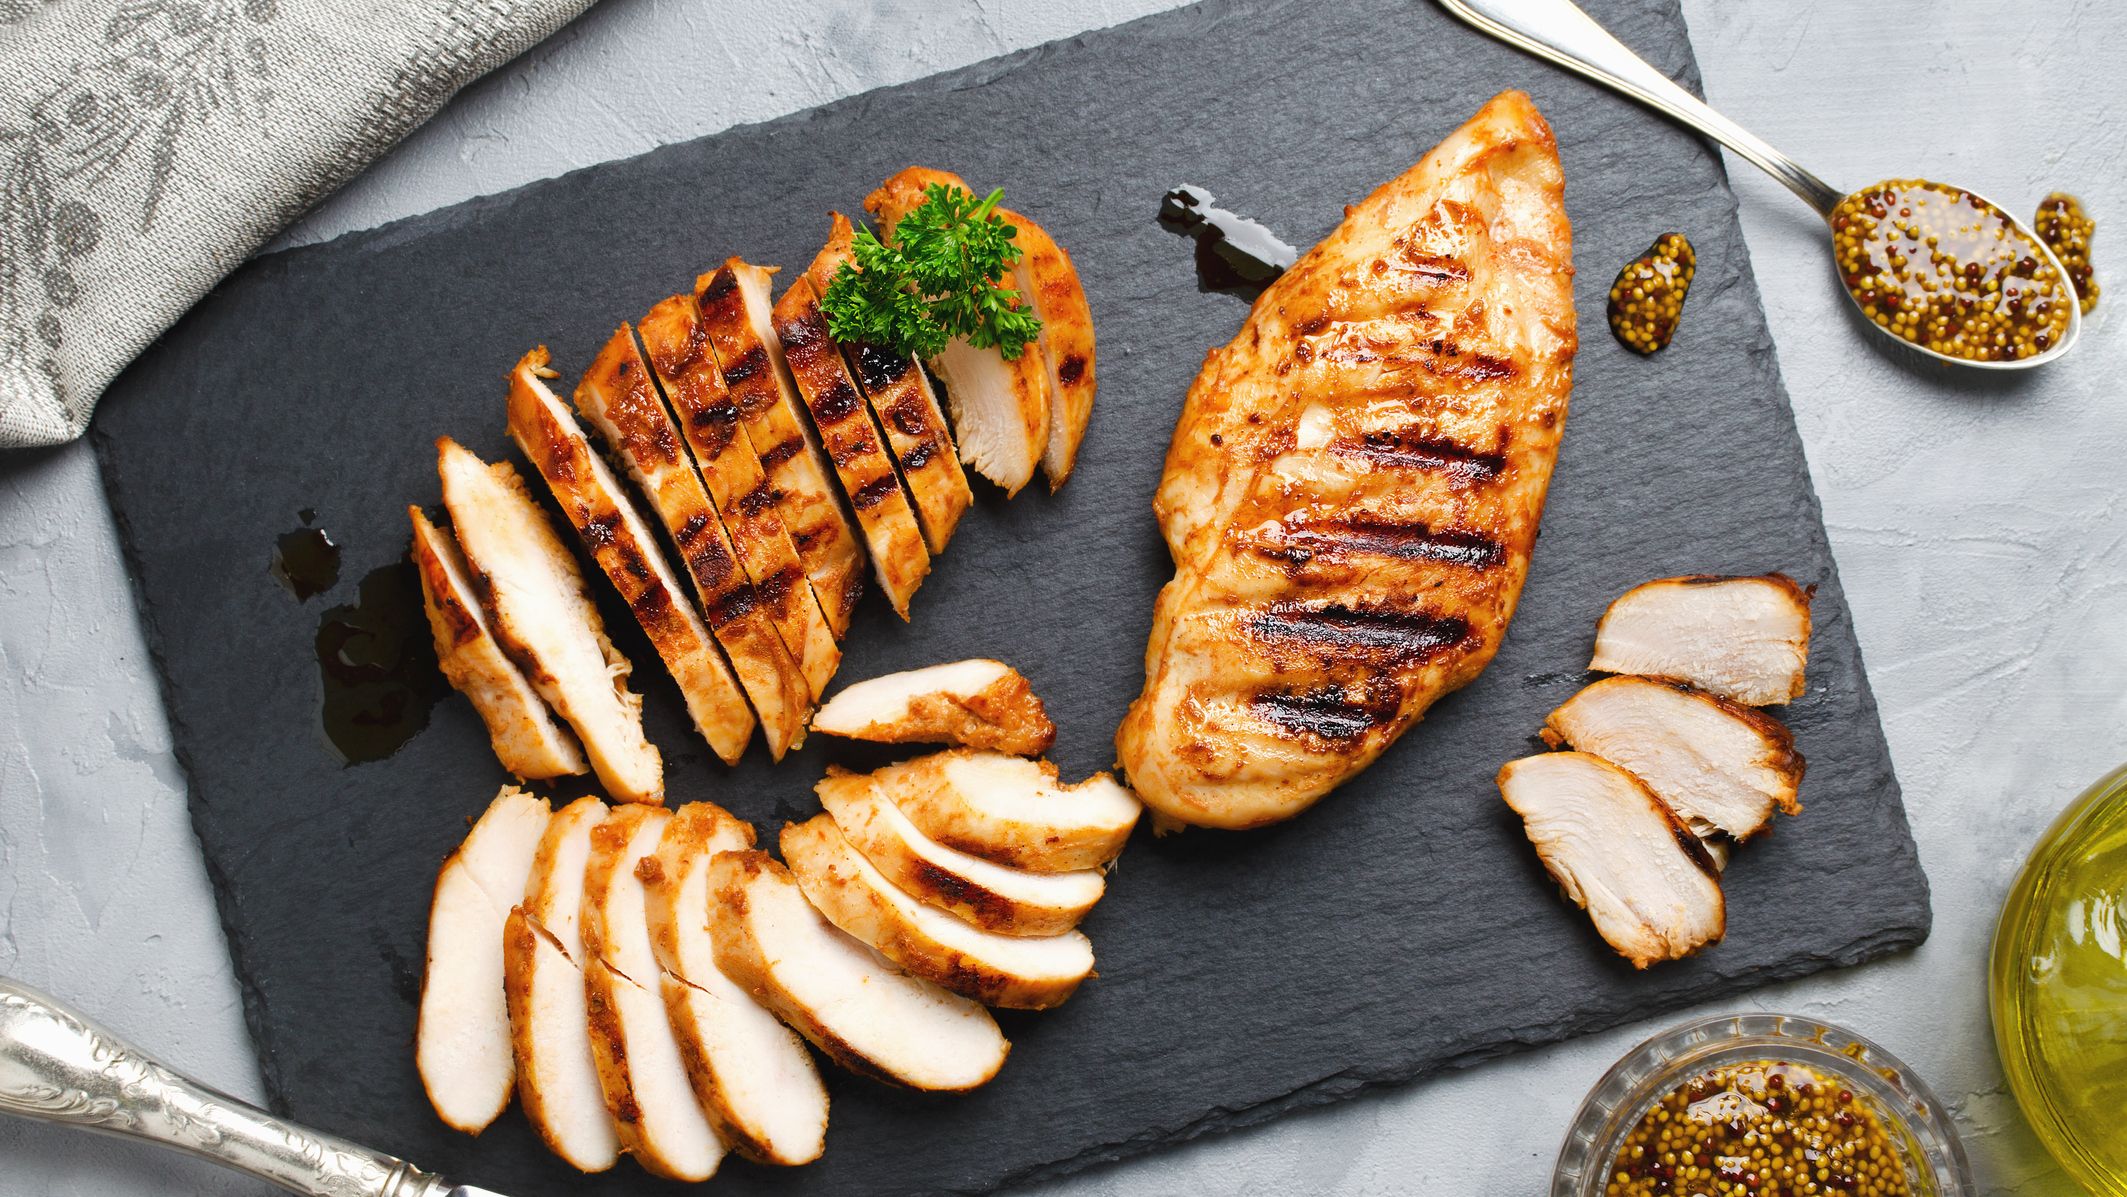 https://hips.hearstapps.com/hmg-prod/images/grilled-chicken-fillets-in-a-spicy-marinade-royalty-free-image-1633985003.jpg?crop=1xw:0.84953xh;center,top